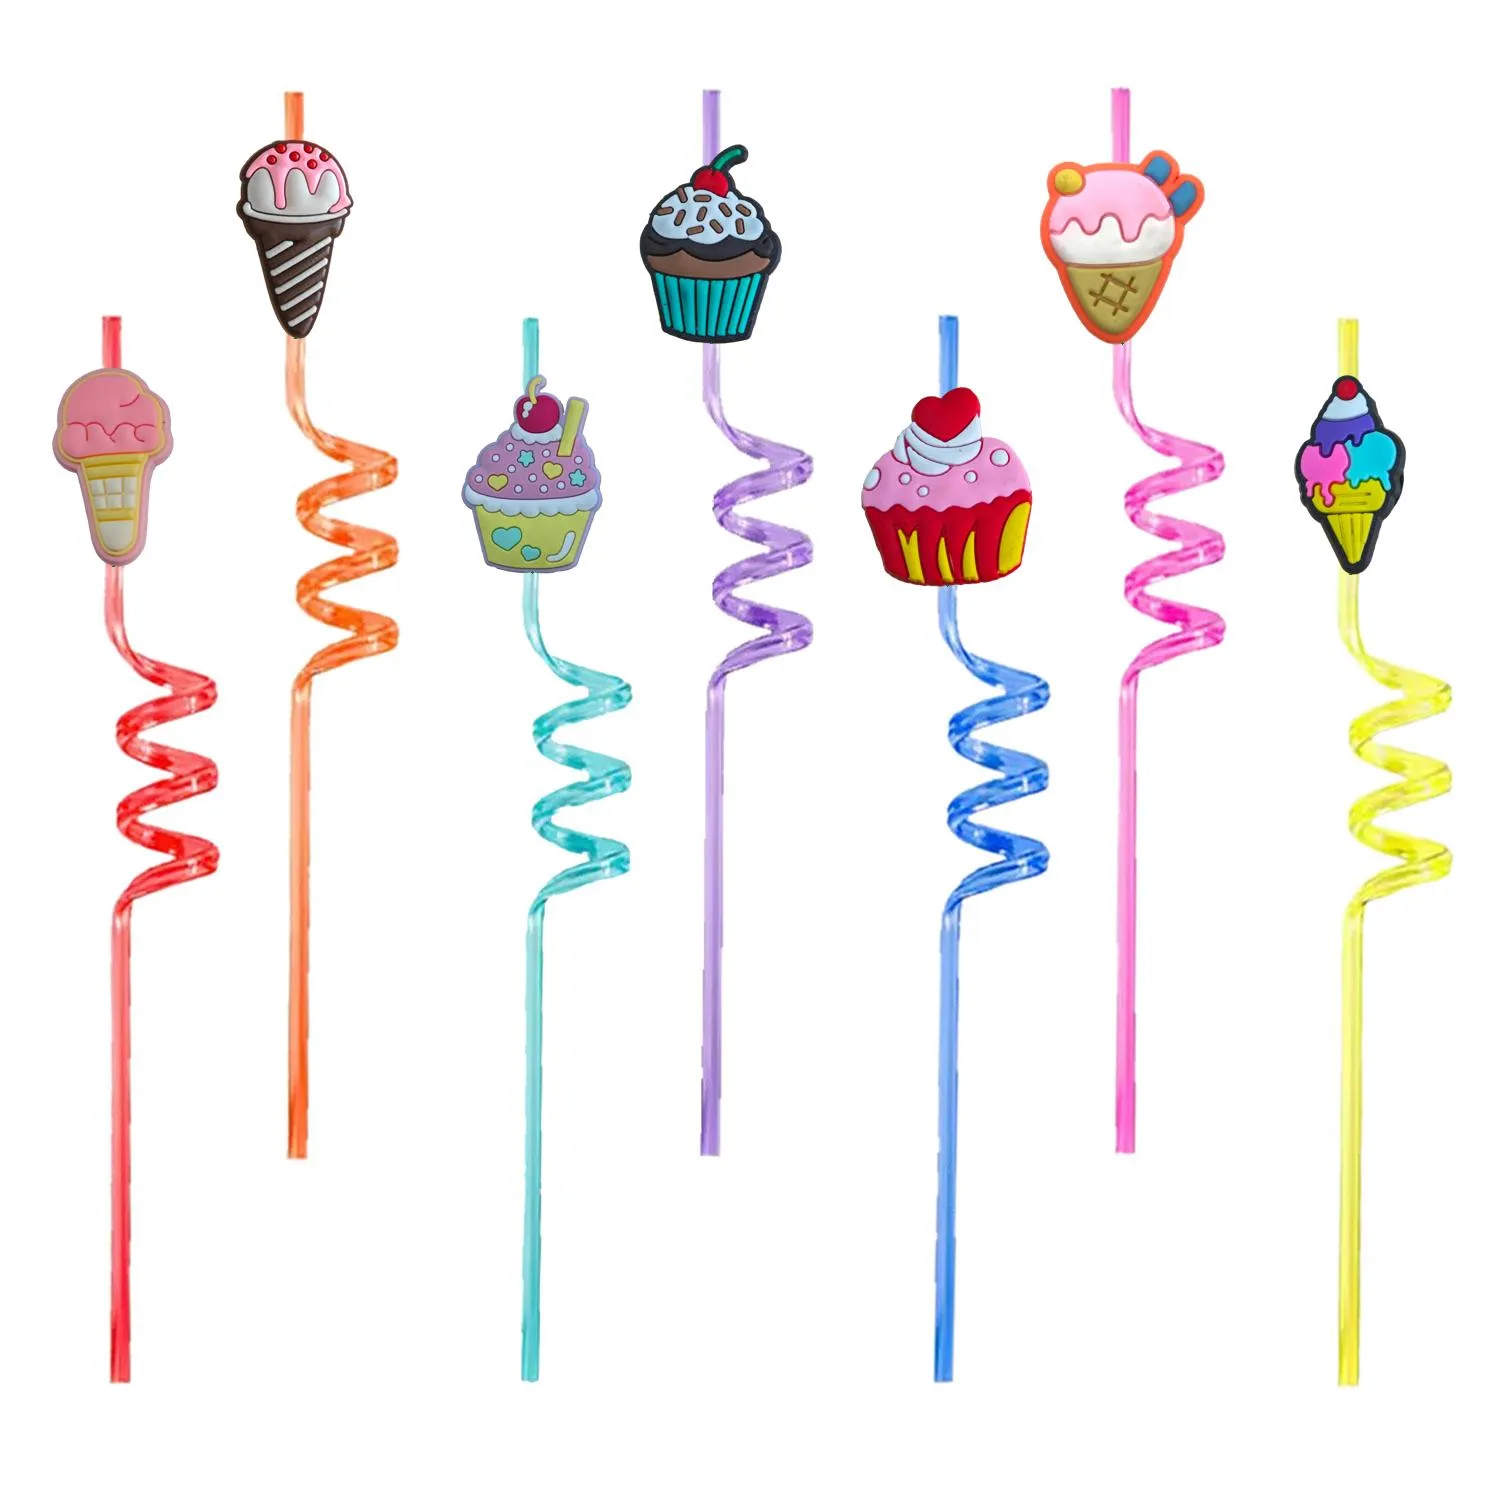 Disposable ers Ice Cream Themed Trame Crazy Cartoon Sts Plastic St Girls Party décorations Boire pour enfants Pool Birthday Supplies FA OTDSO